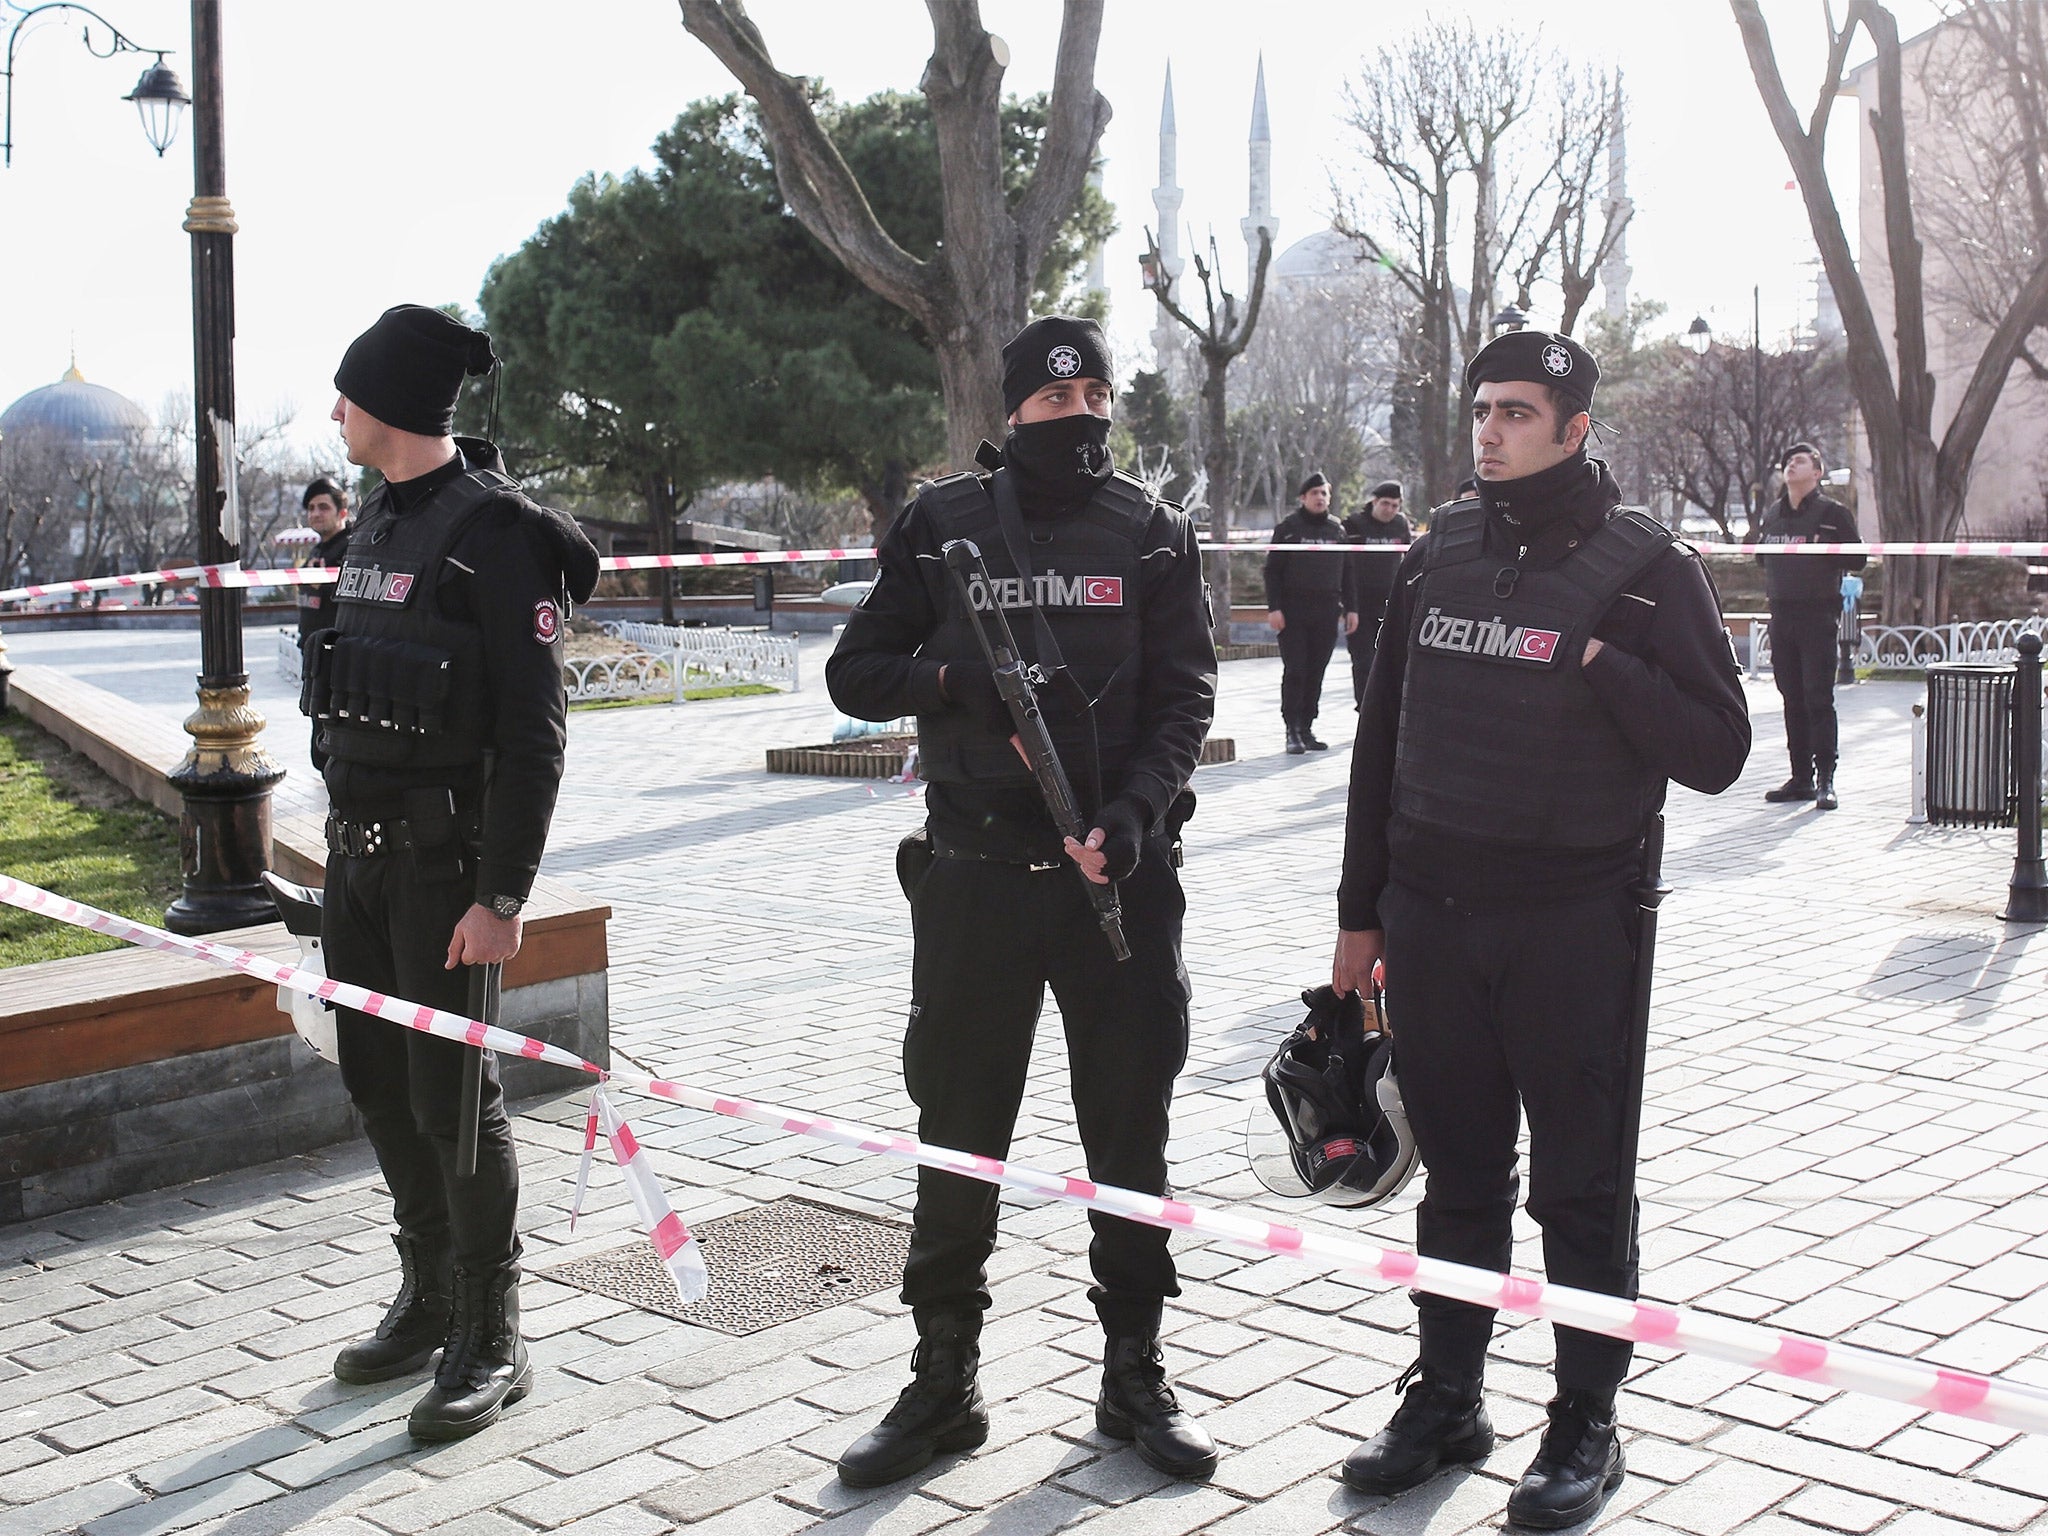 Turkish police secure the area after an explosion in the Sultanahmet district of Istanbul